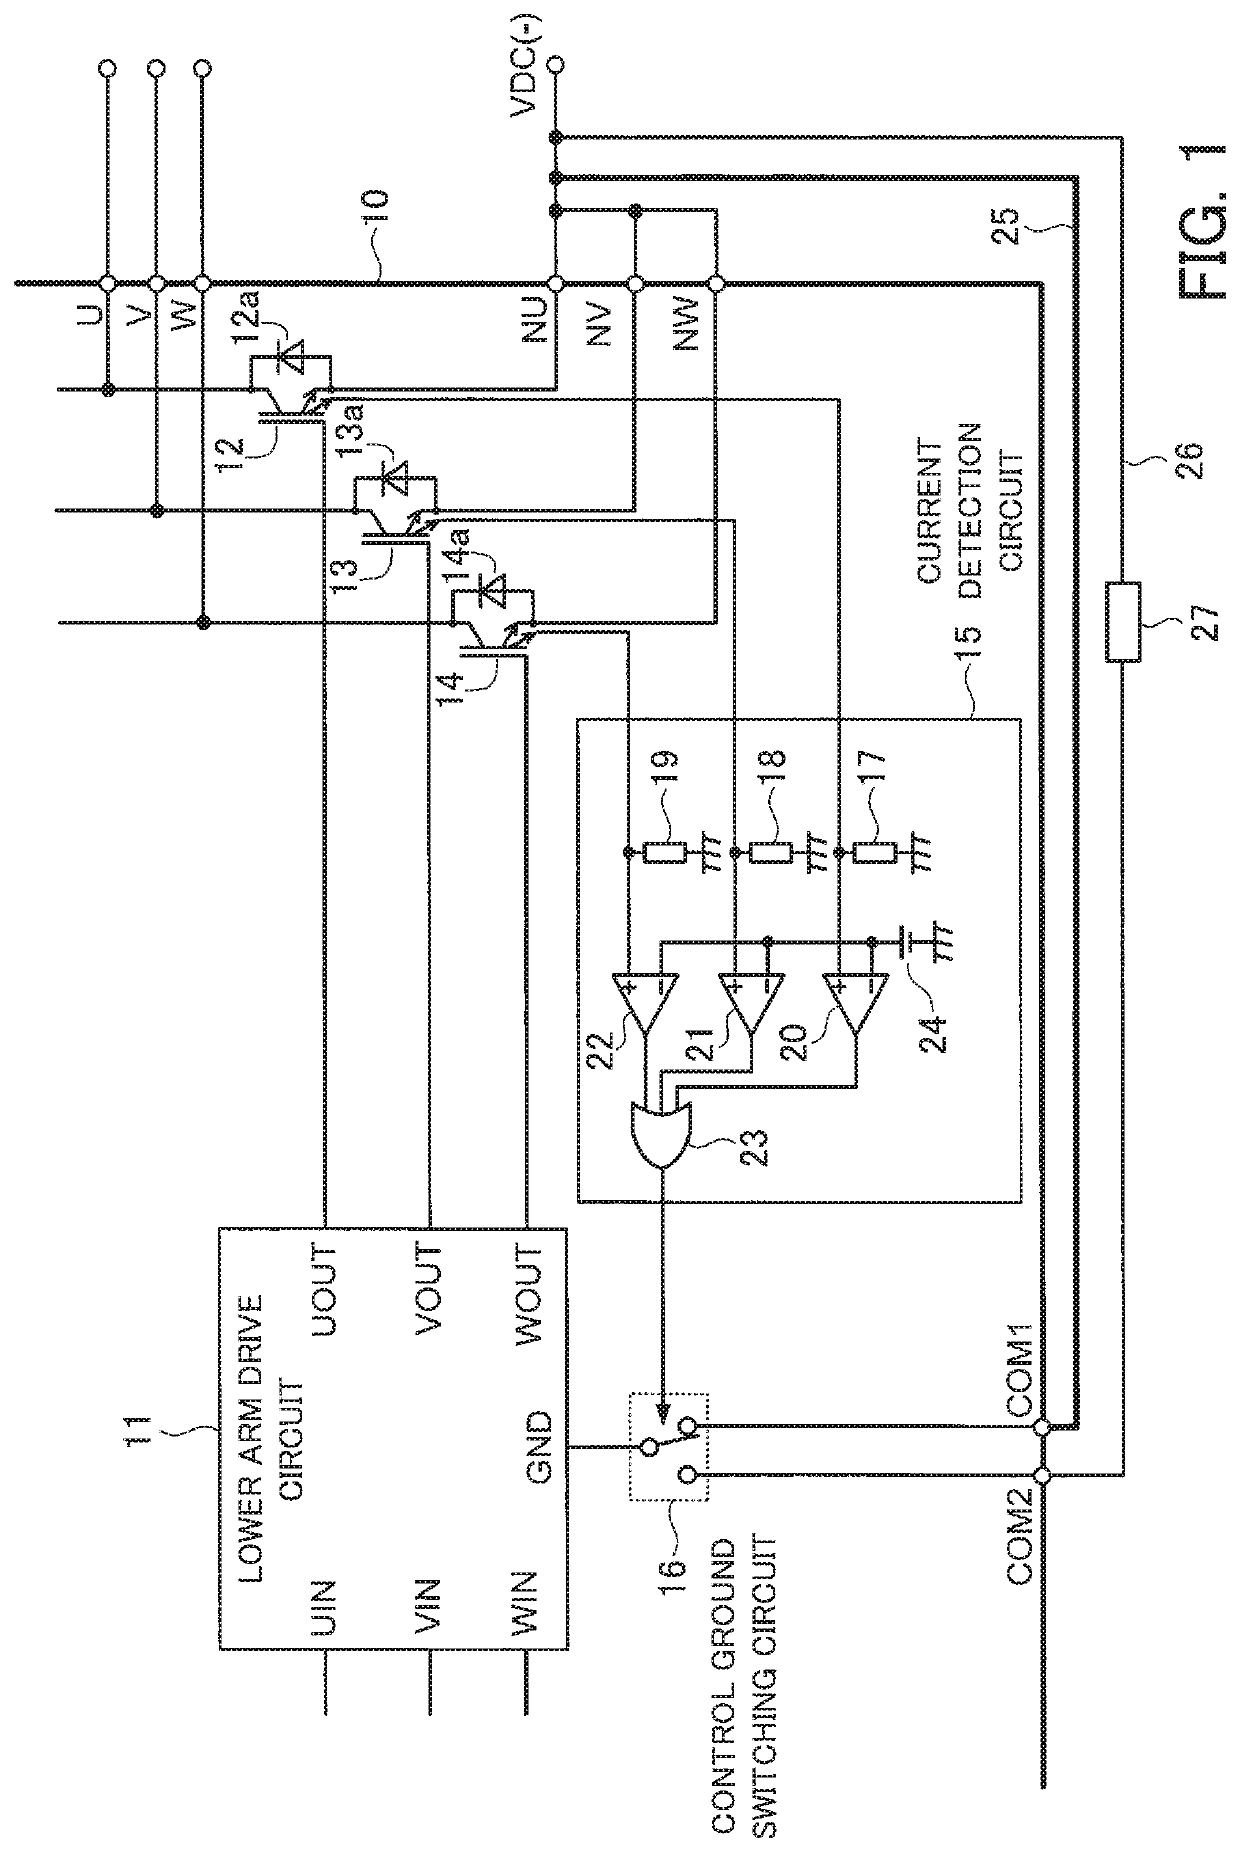 Power module with built-in drive circuit